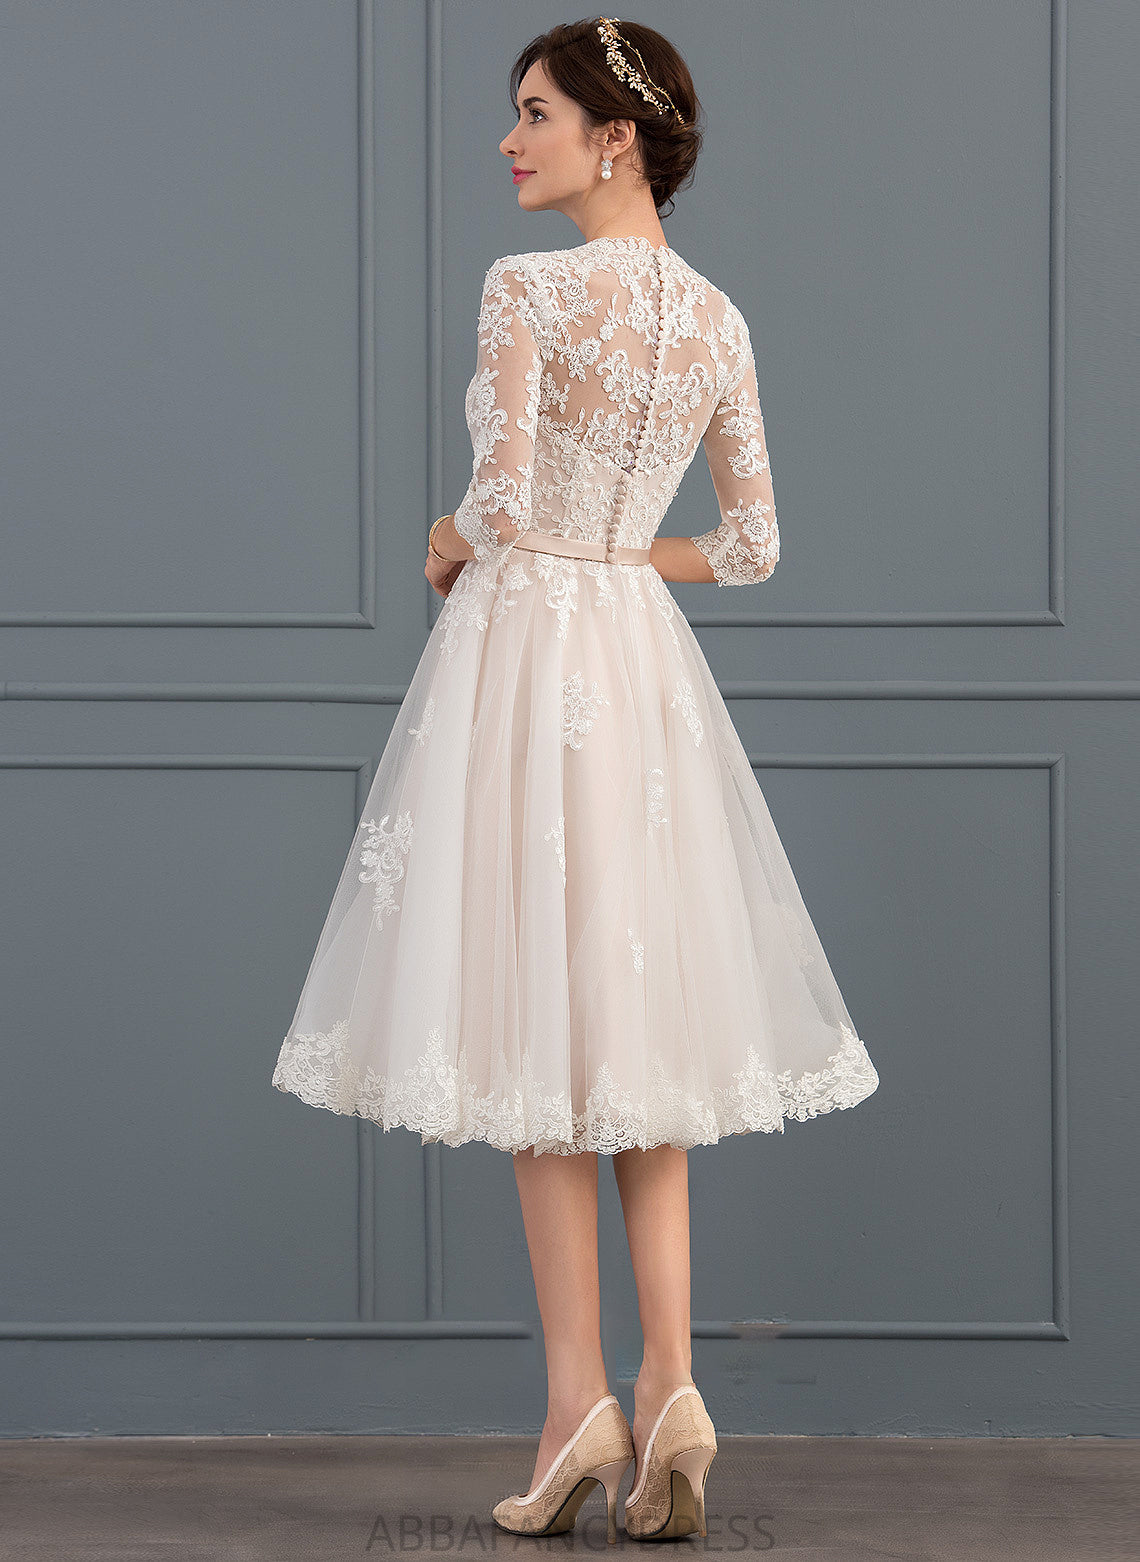 A-Line Dress Wedding Dresses With Tulle V-neck Bow(s) Anabella Knee-Length Wedding